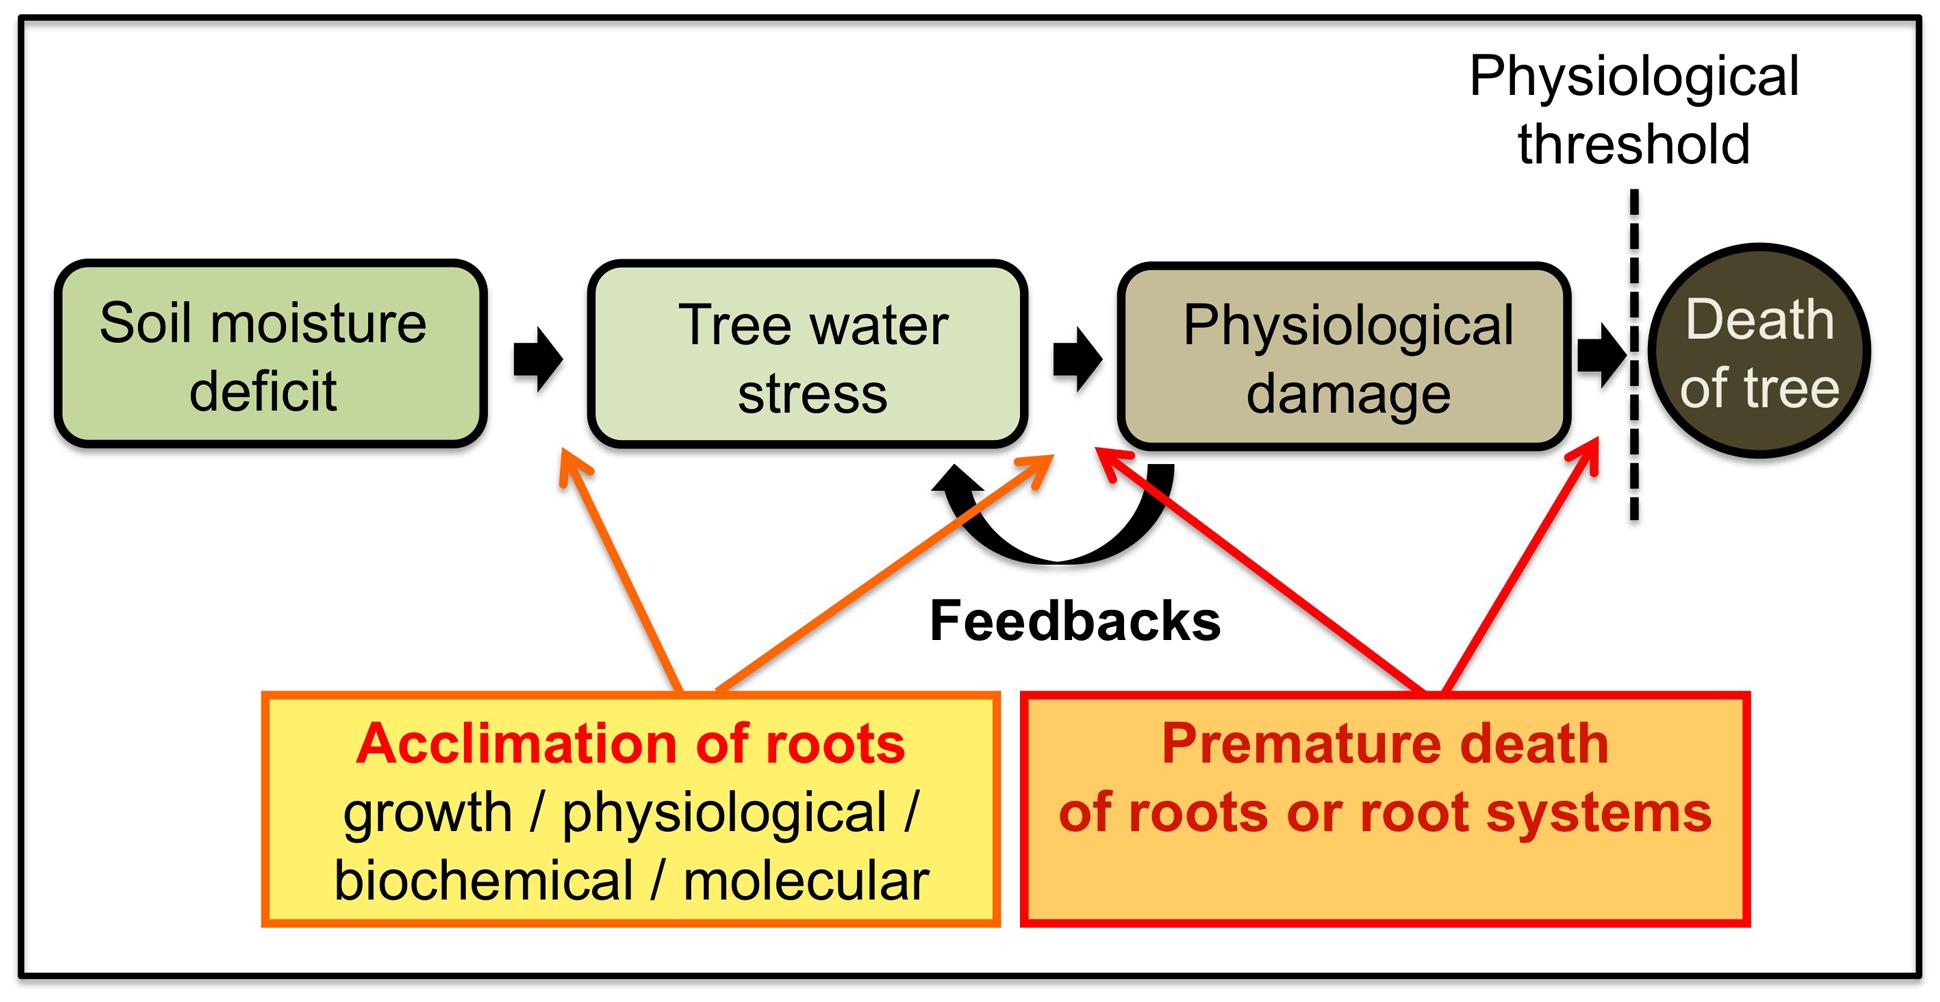 What are the two main functions of roots?